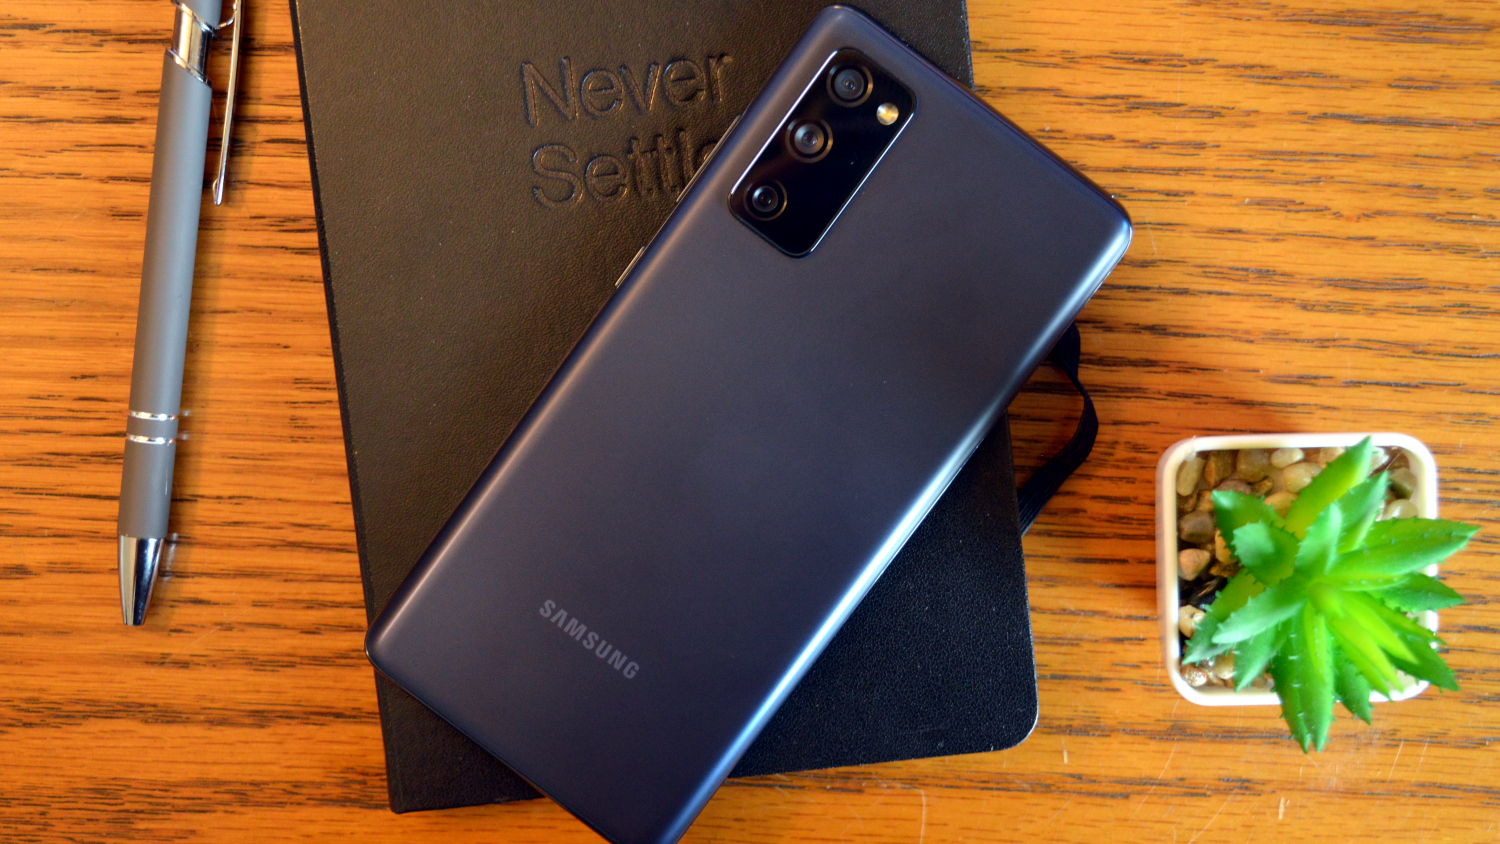 Samsung Galaxy S20 FE Review: The Phone to Beat Under $700